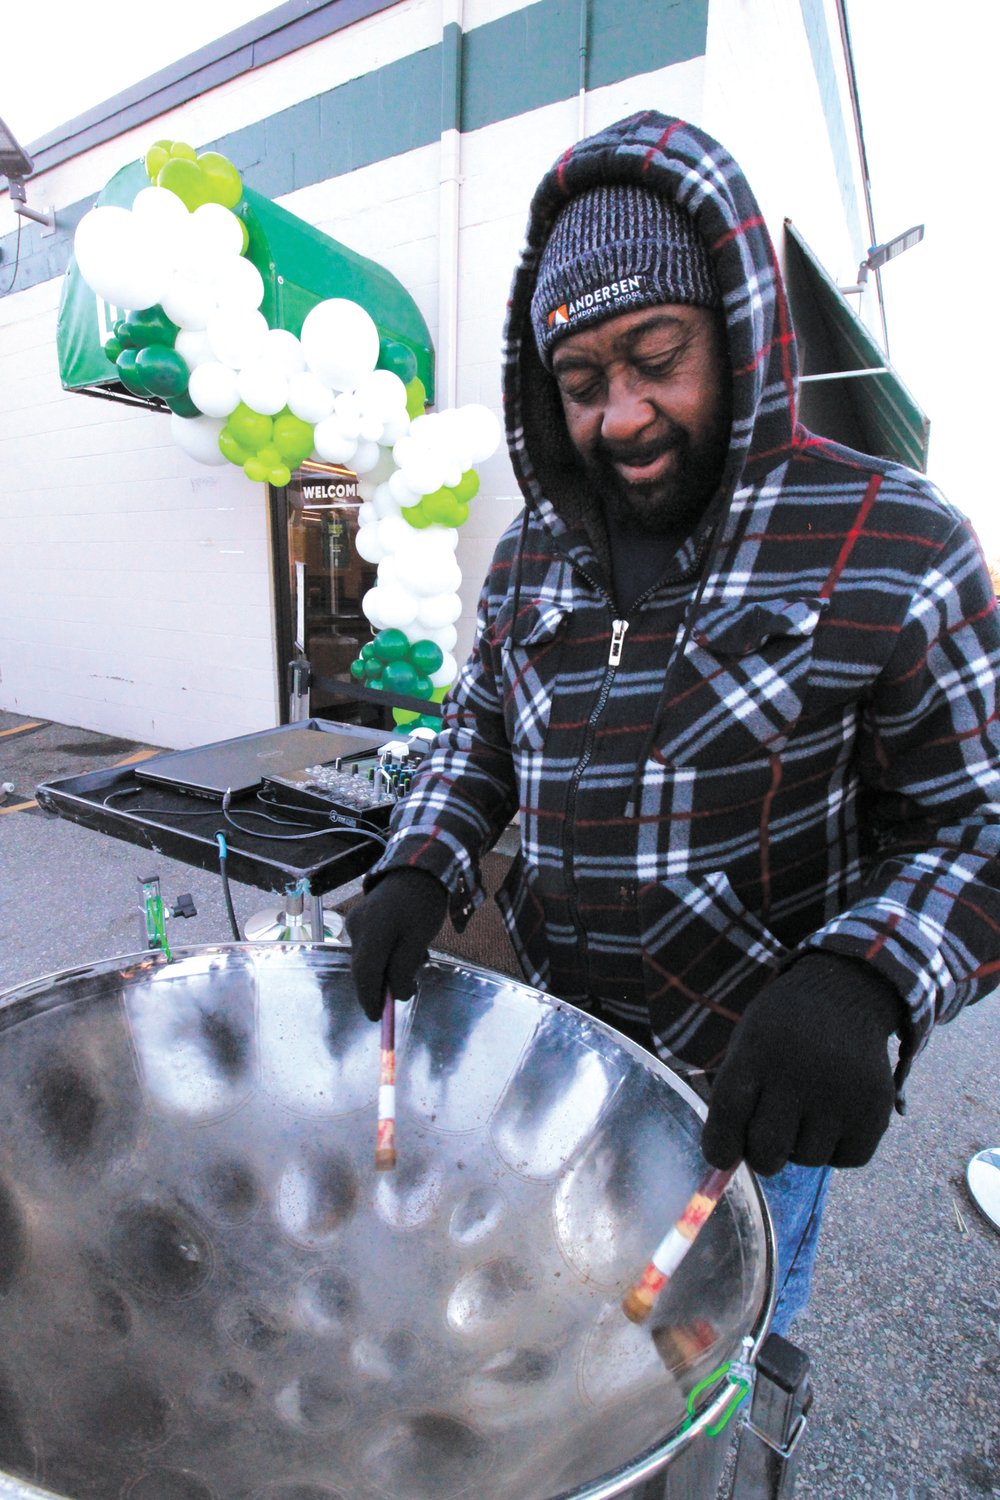 DRUMMING UP BUSINESS: Bernell Henry entertained customers on the opening day of recreational marijuana sales at the RISE shop, formerly the Summit Compassion Center, on Jefferson Boulevard in Warwick. (Cranston Herald photos)